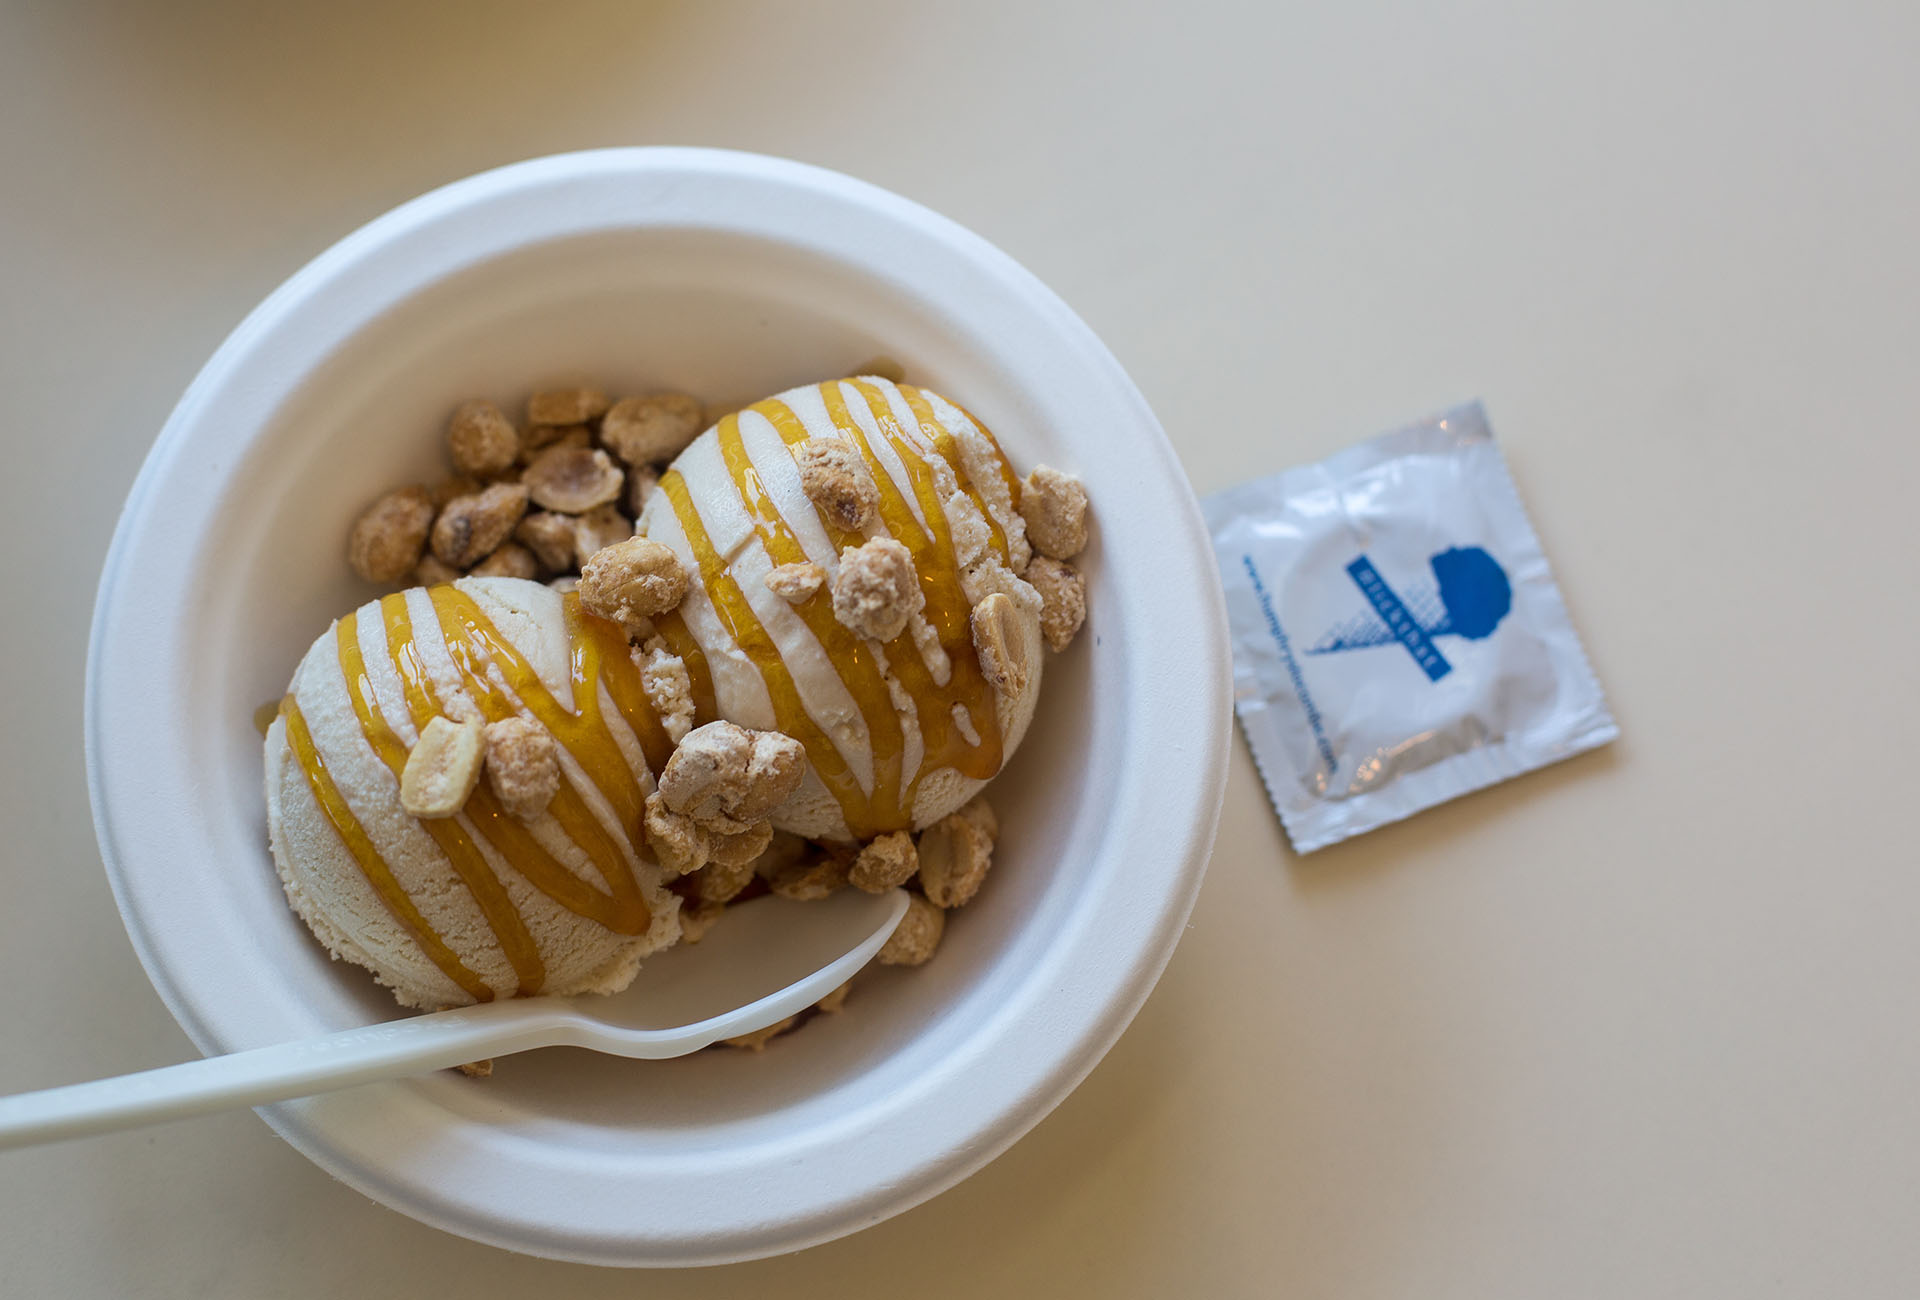 The Whos Your Daddy Sundae, alongside the Humphry Slocombe condoms, which are also available for Pride.